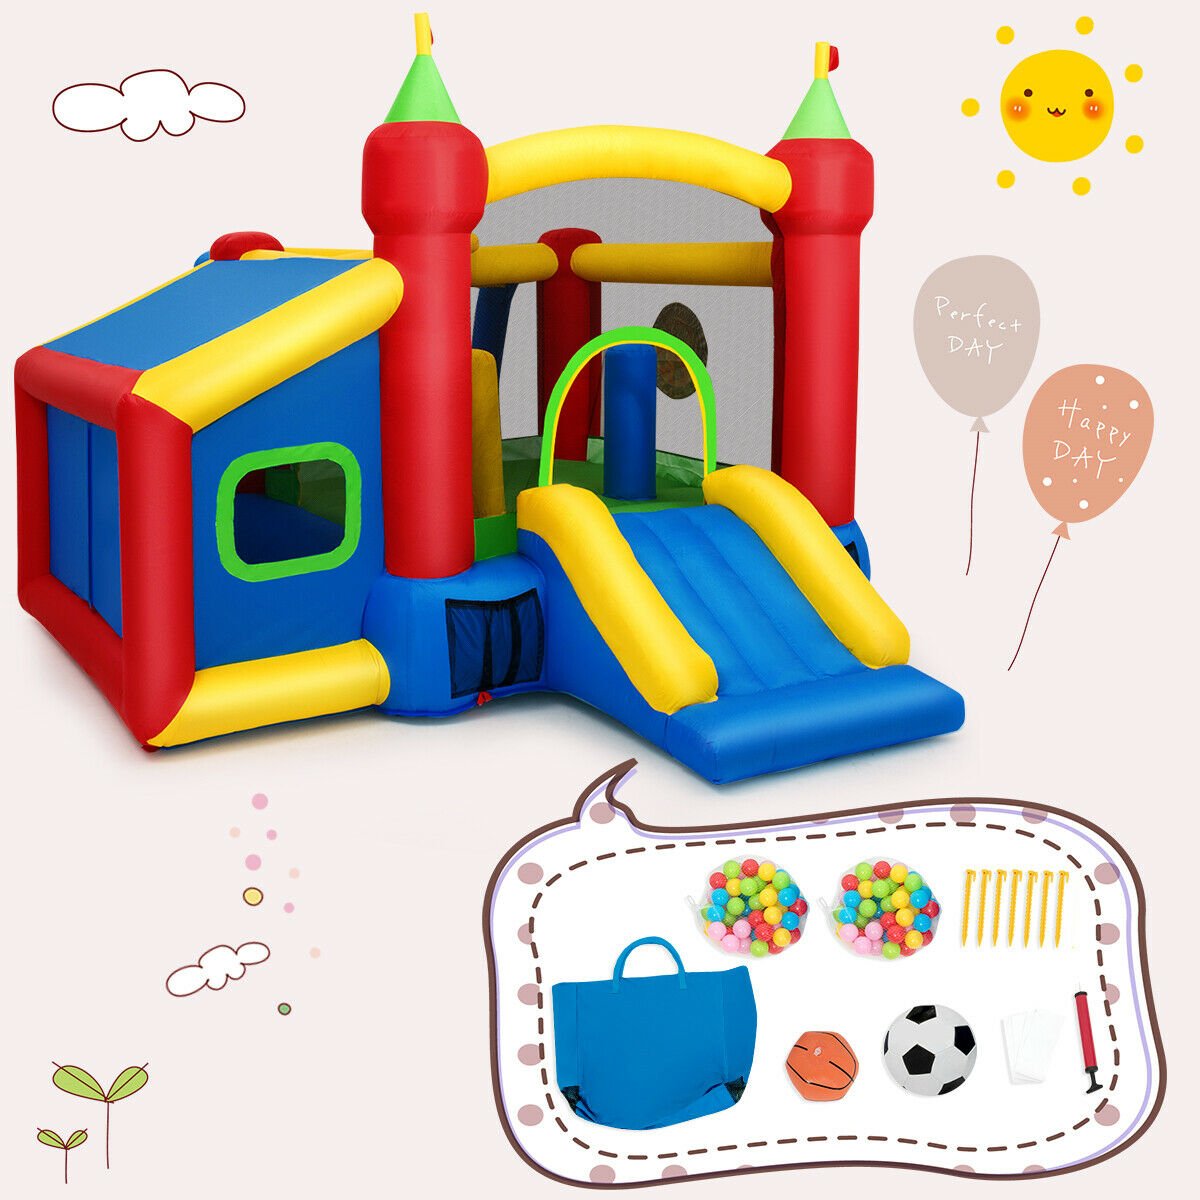 7-in-1 Kids Play Palace - Inflatable Bounce House with Ocean Balls